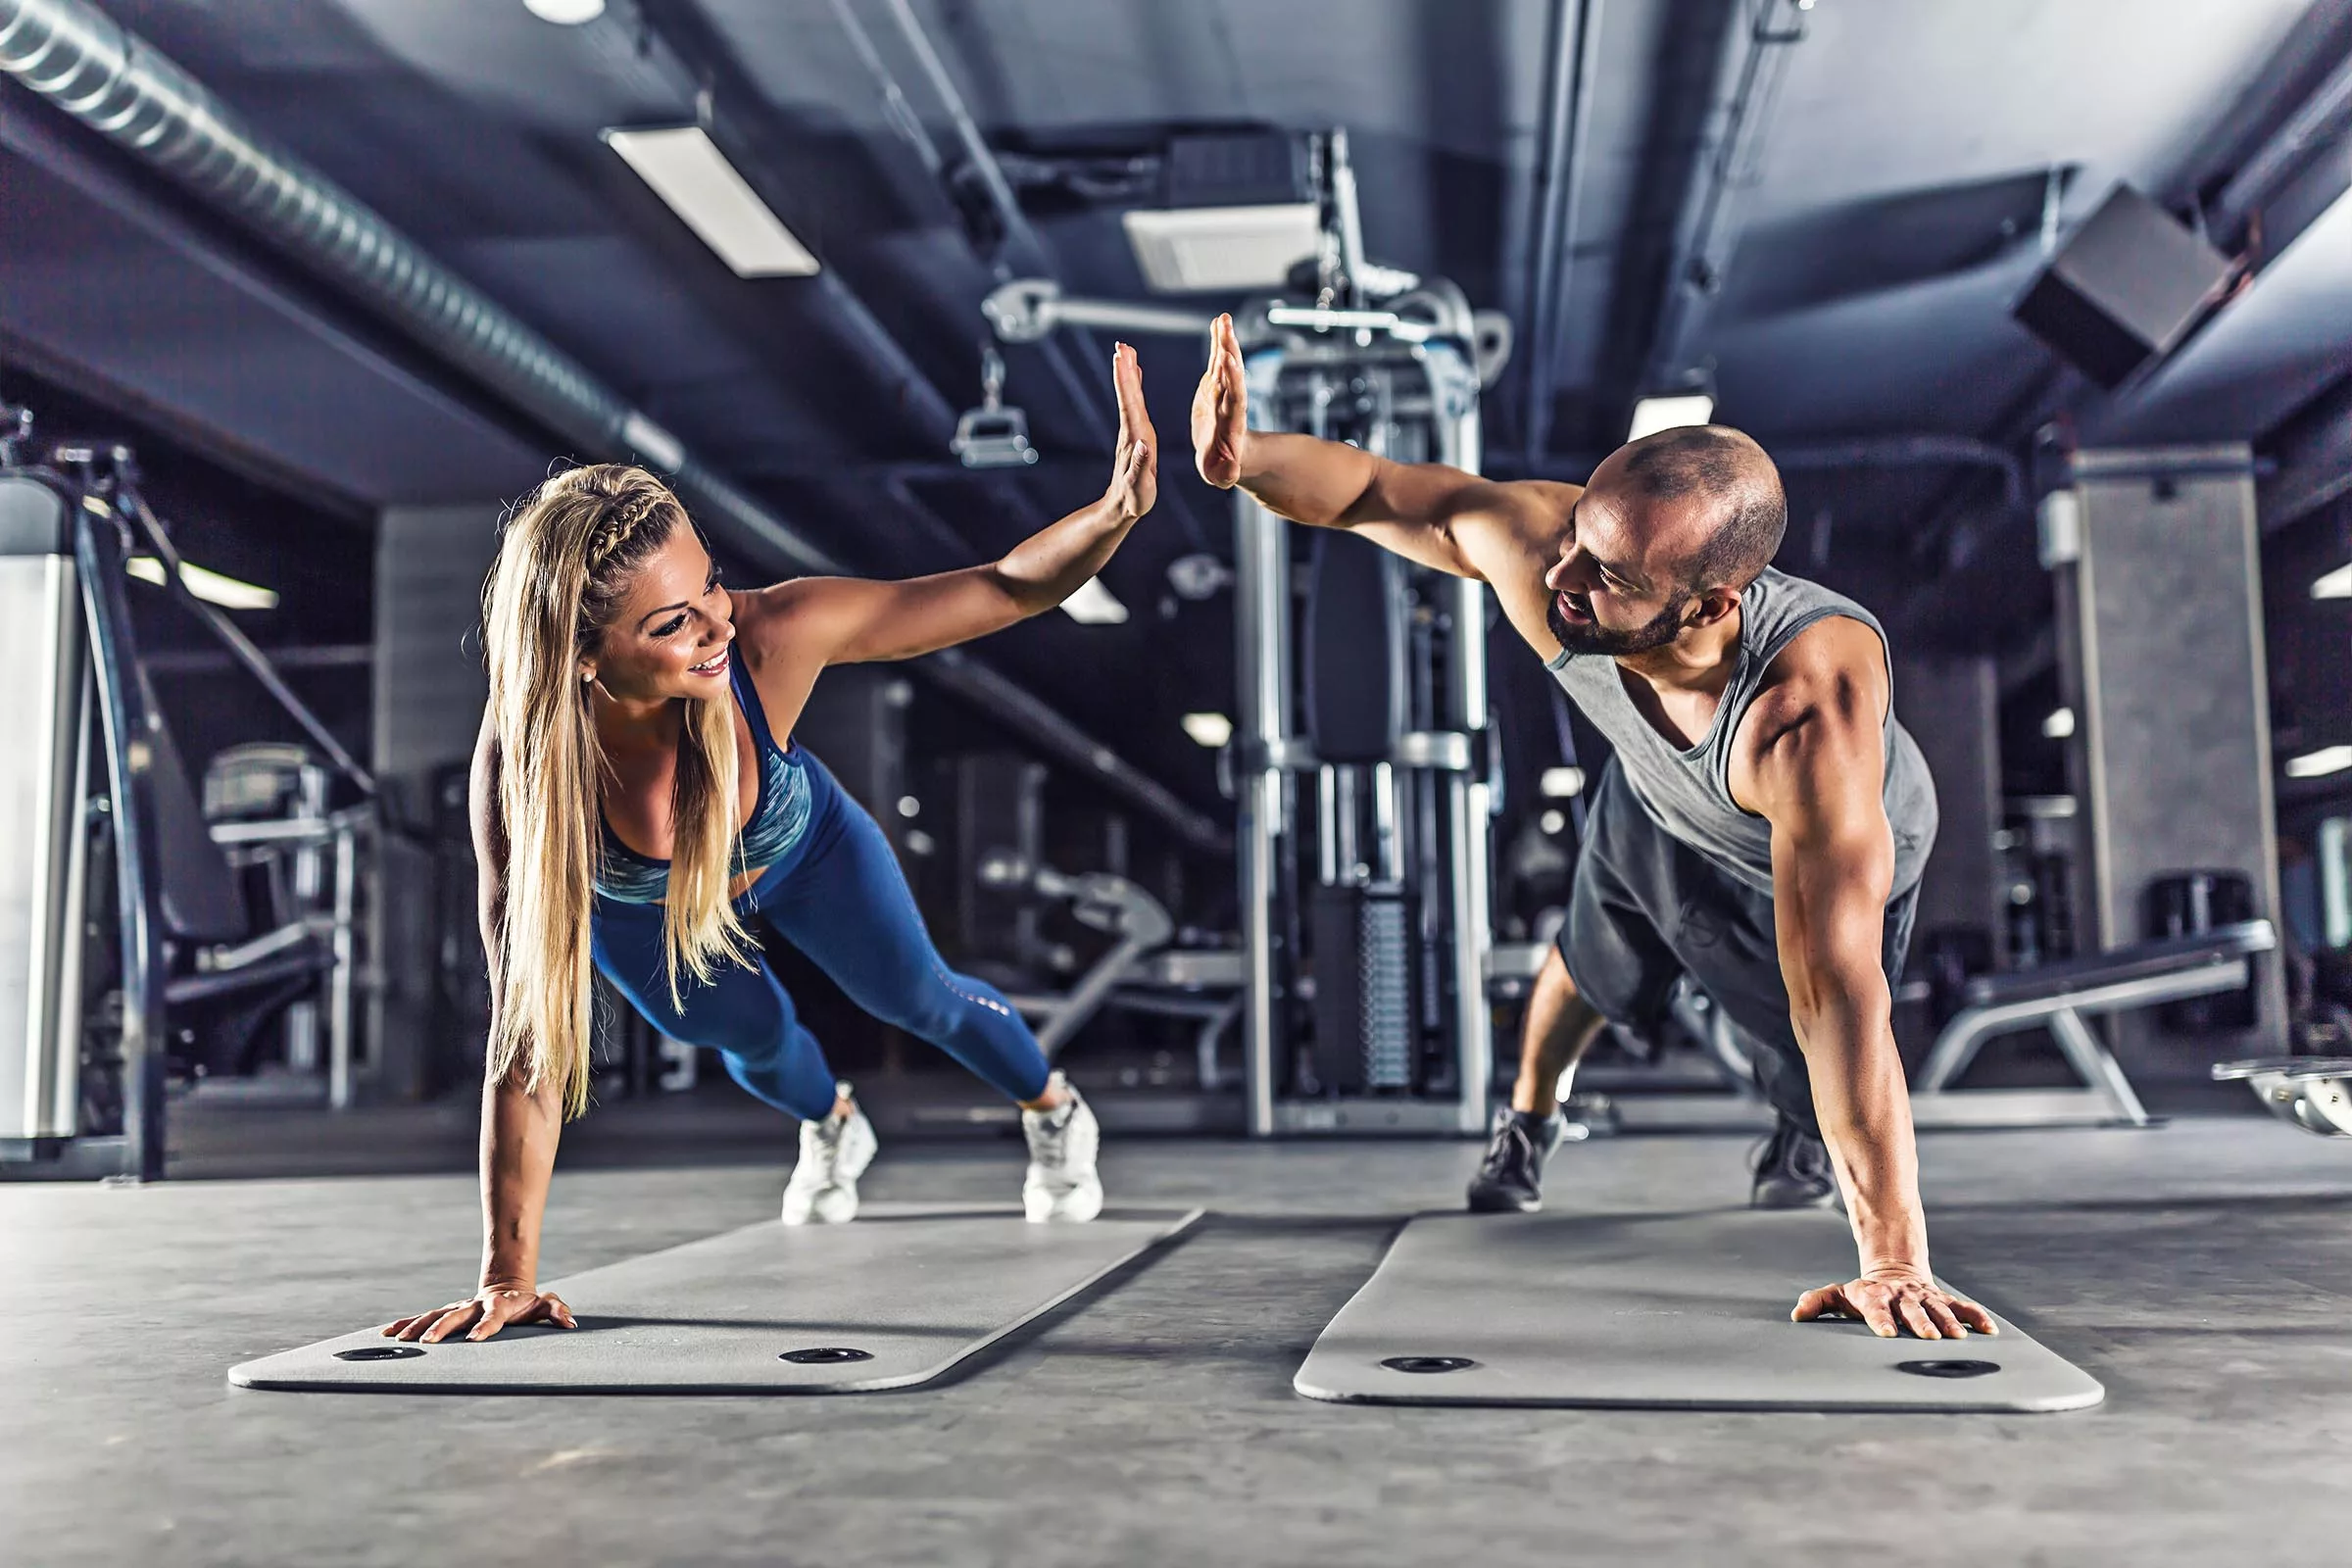 Sport couple doing plank exercise workout and giving each other high fives. Couple holding each other accountable to their fitness goals